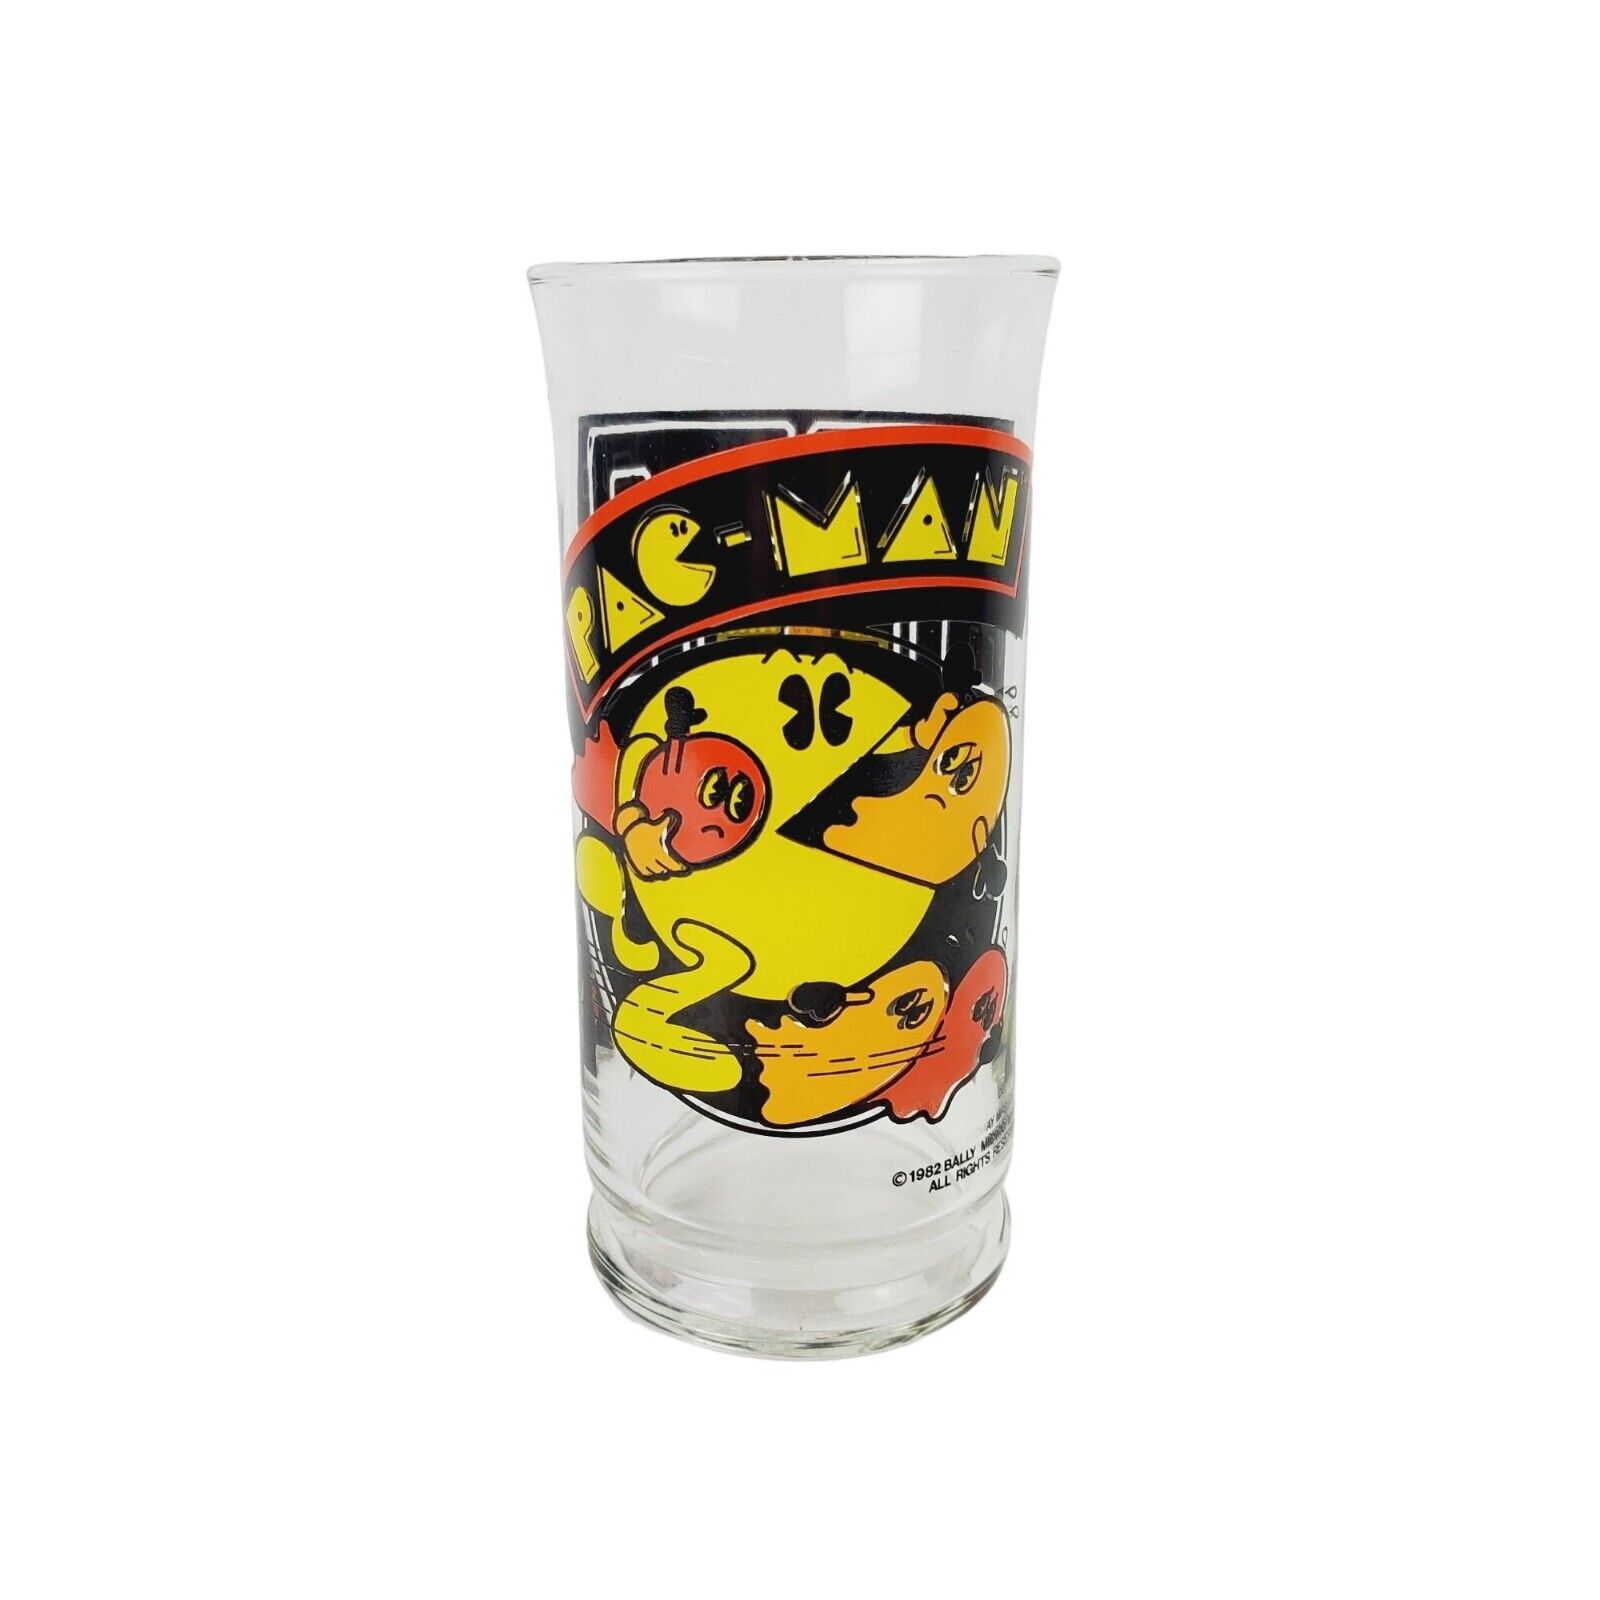 Vintage 1982 Pac-Man Glass by Bally Midway Mfg Co., 16 oz NWOB